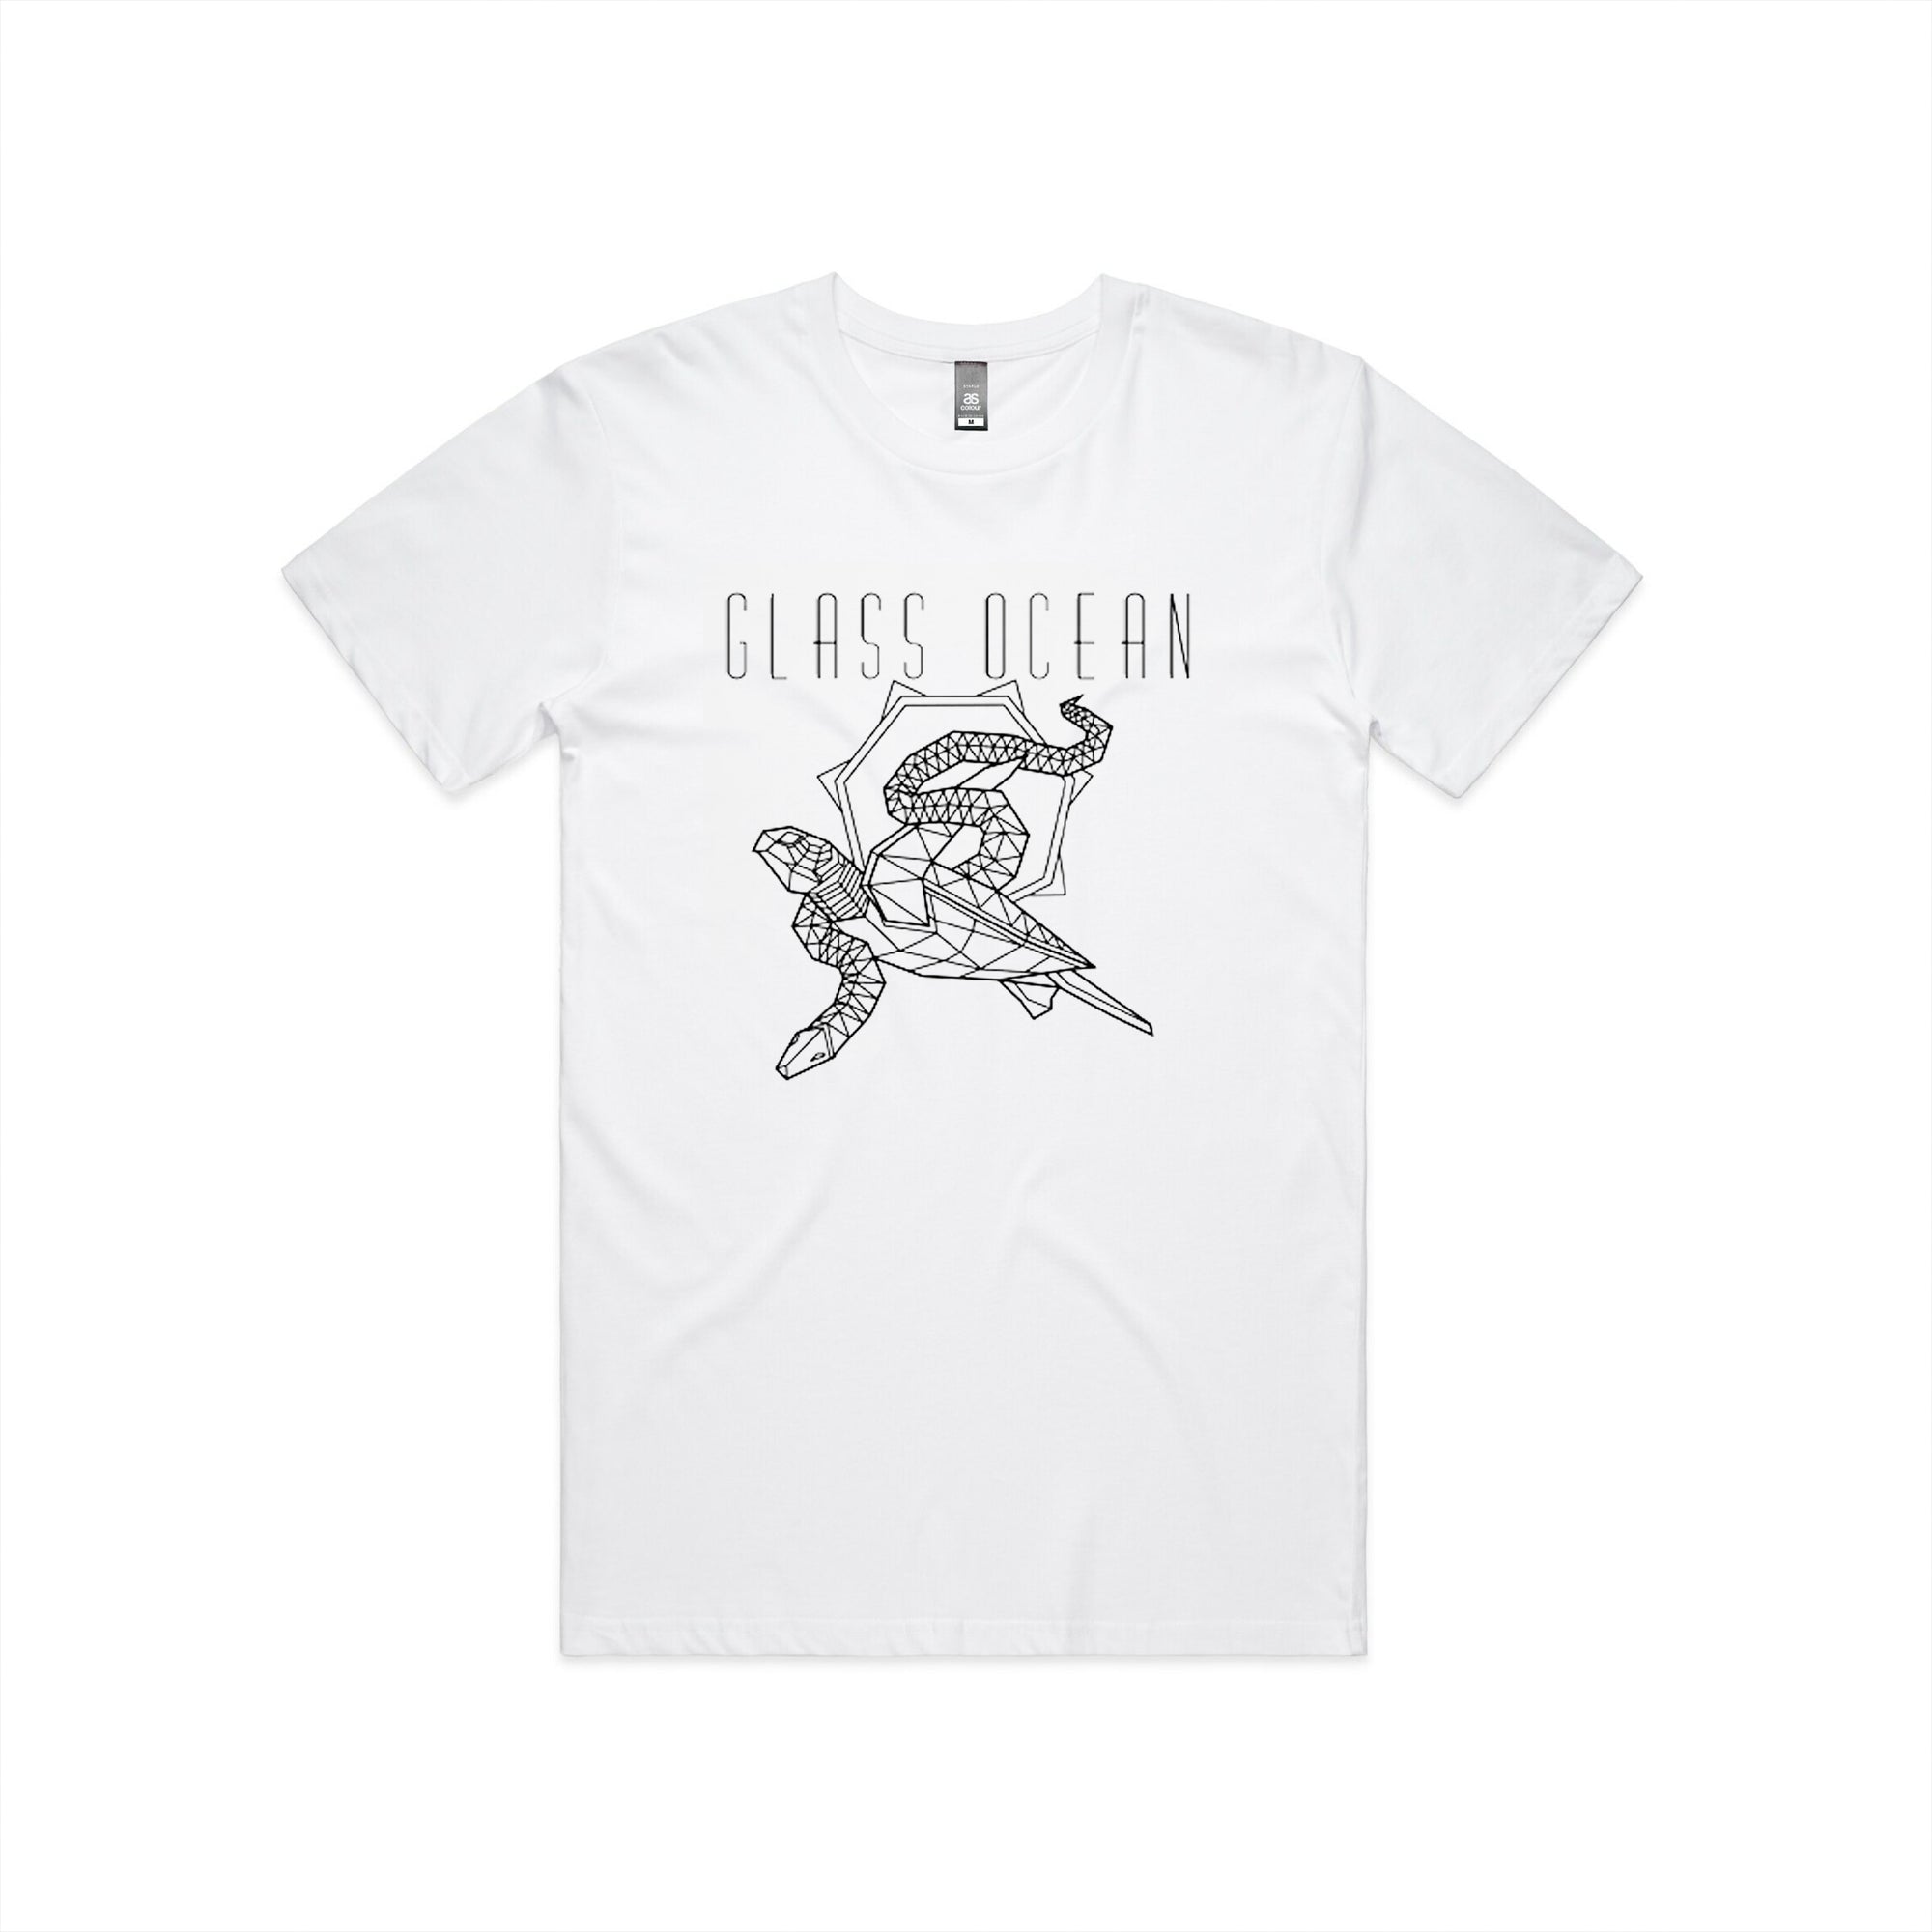 GLASS OCEAN // TURTLE SNAKE T-SHIRT - GREY - Wild Thing Records